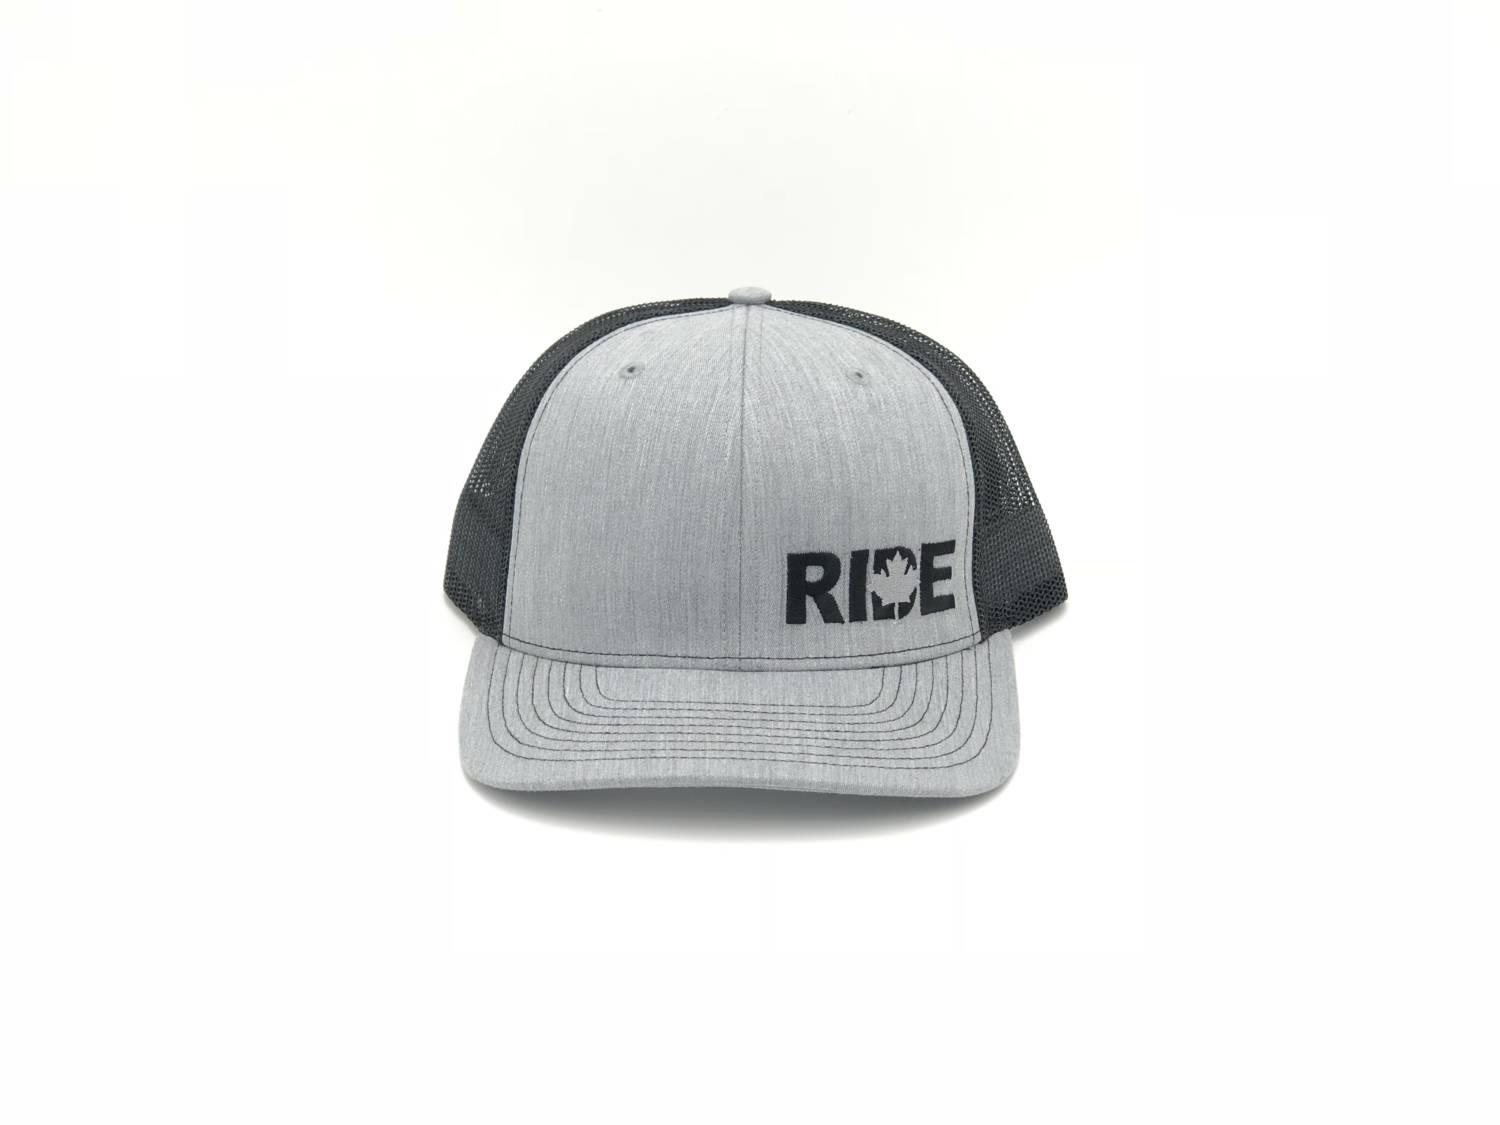 Ride Canada Classic Pro Night Out Embroidered Snapback Trucker Hat Heather Gray/Black